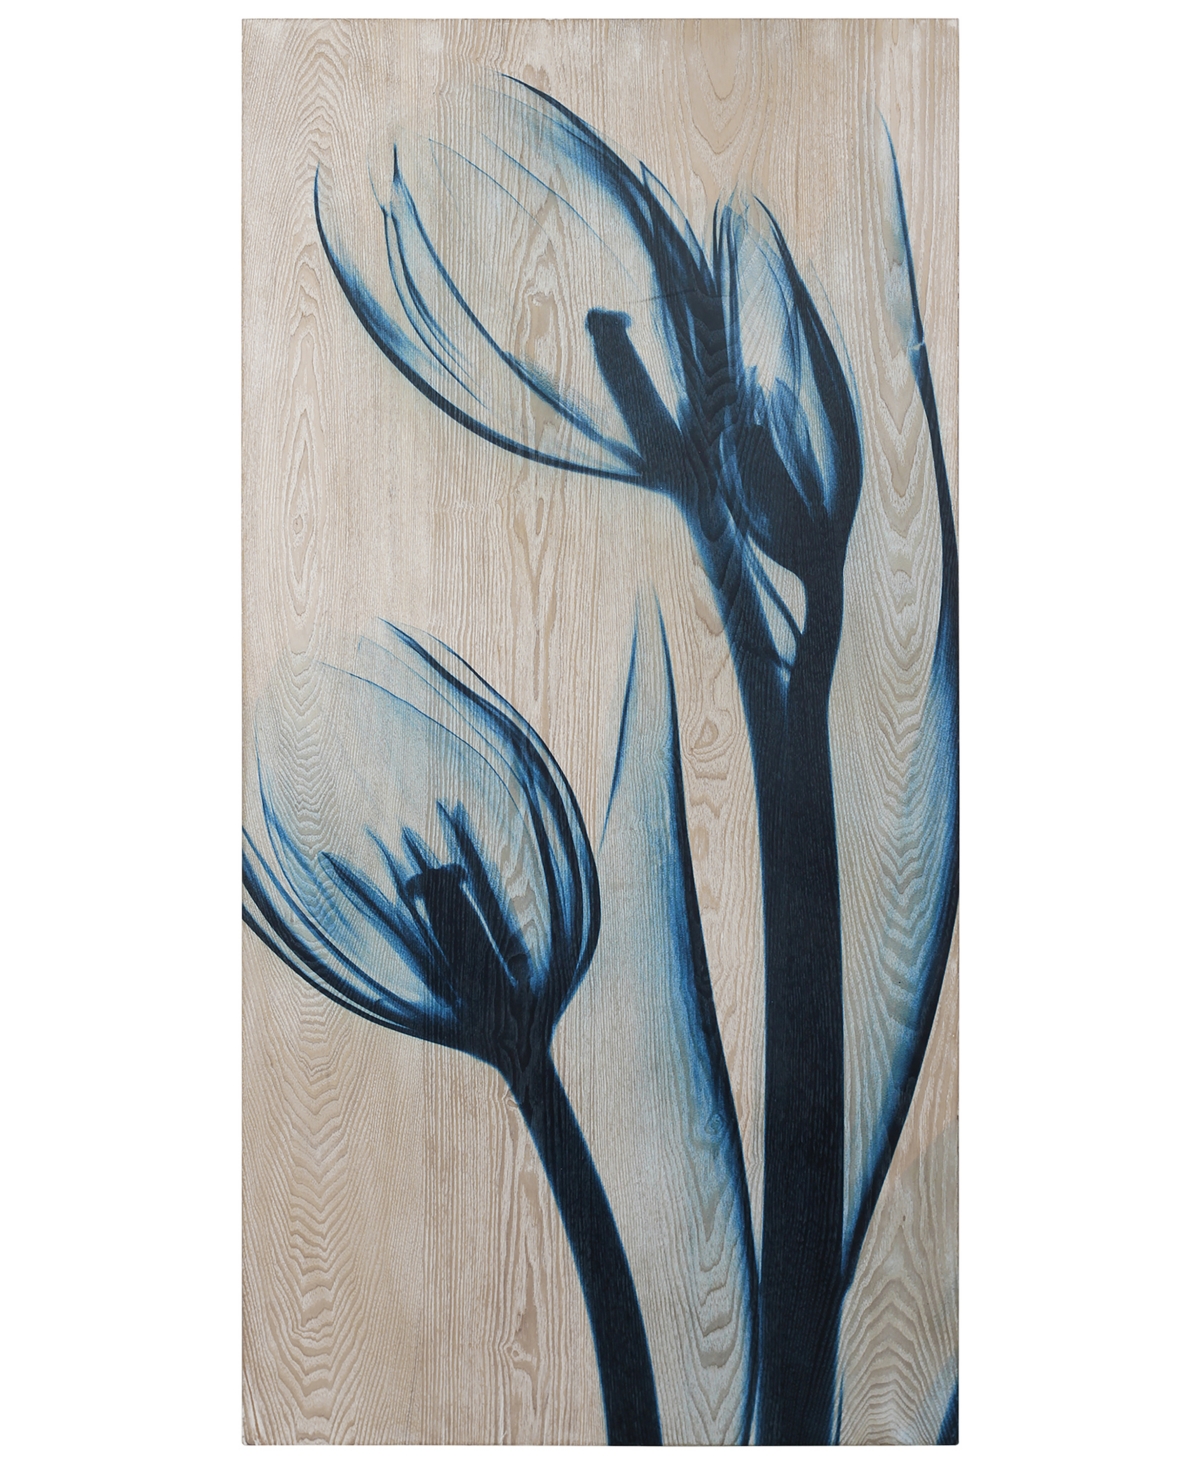 Empire Art Direct Tulips Fine Radiographic Photography Hi Definition Giclee Printed Directly On Hand Finished Ash Wood In Blue